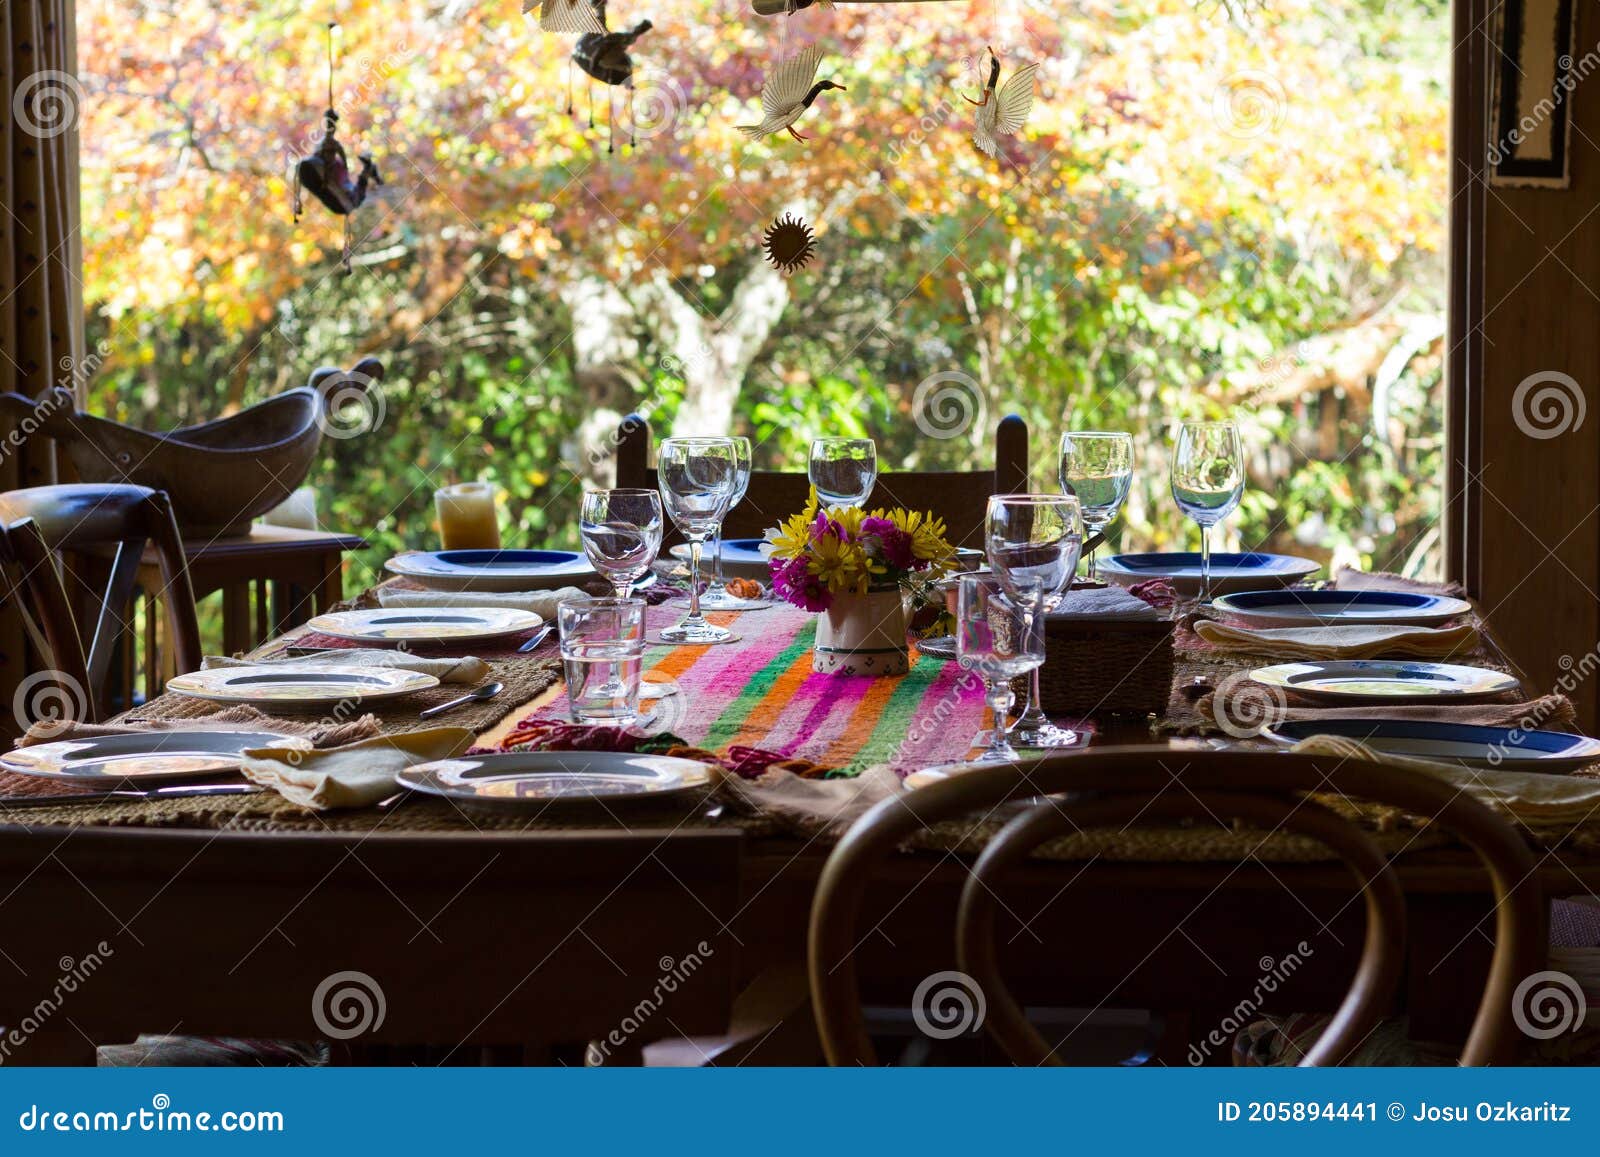 wooden chairs and table set for family reunion meal